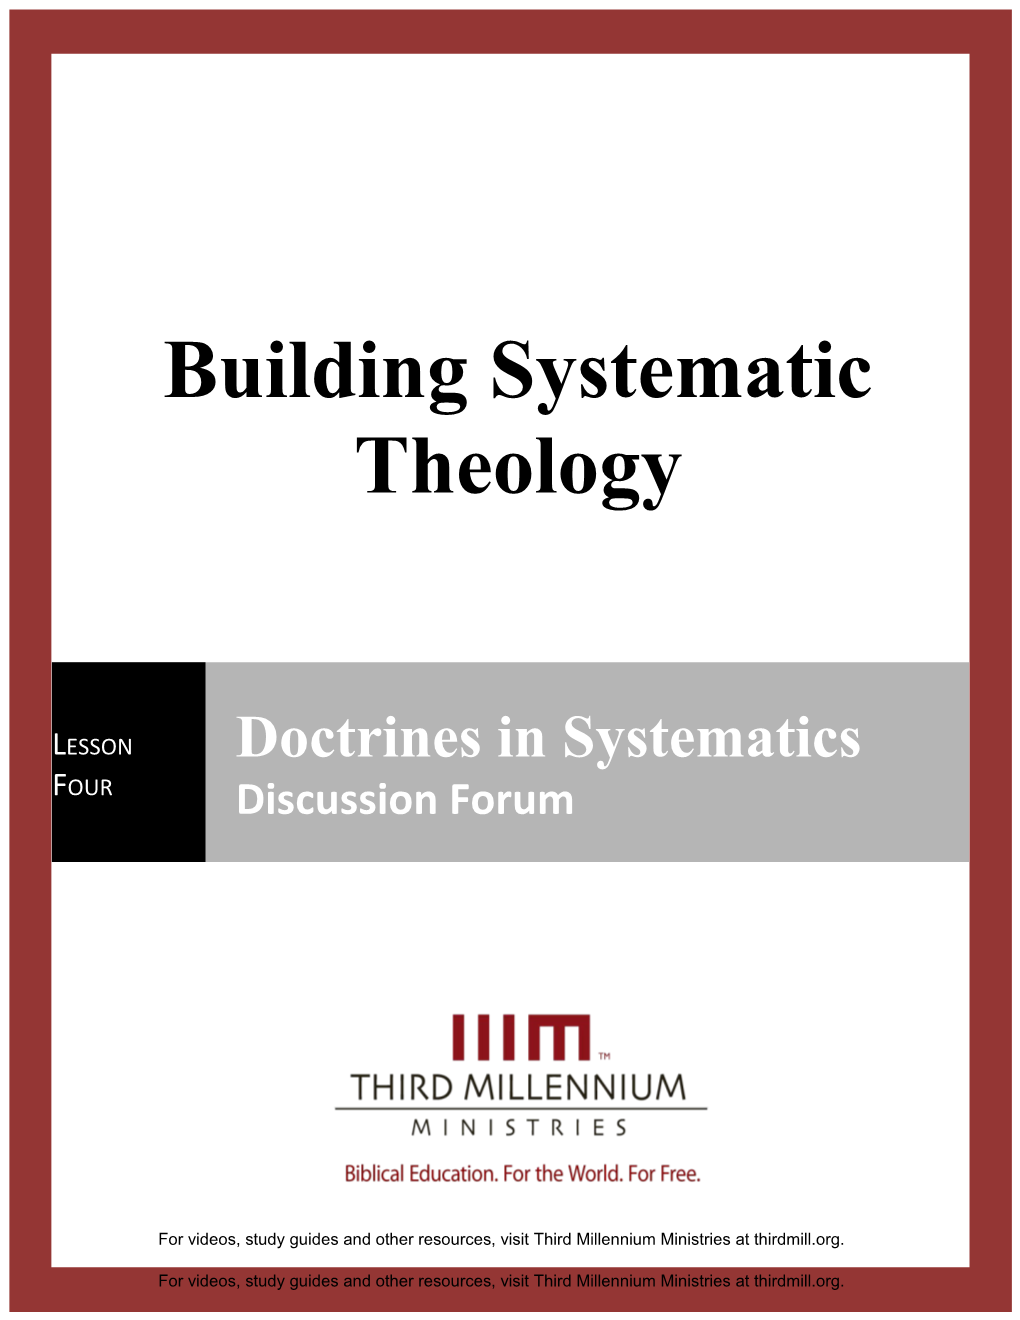 Building Systematic Theology Lesson 4 Discussion Forum